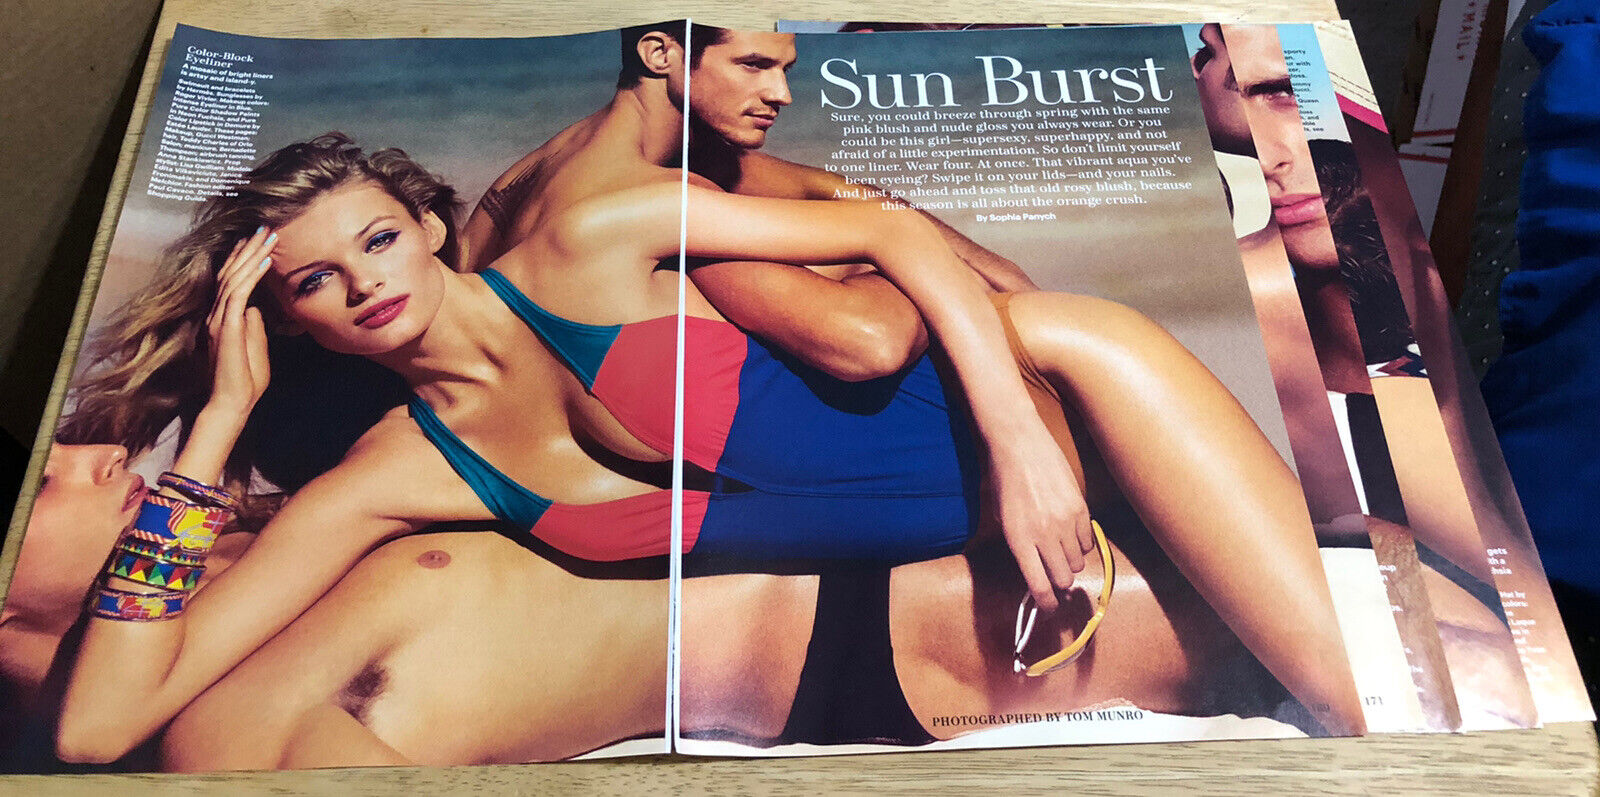 2013 Male & Female Models Sexy Bathing Suit Poses - 6-Pg Fashion Clippings